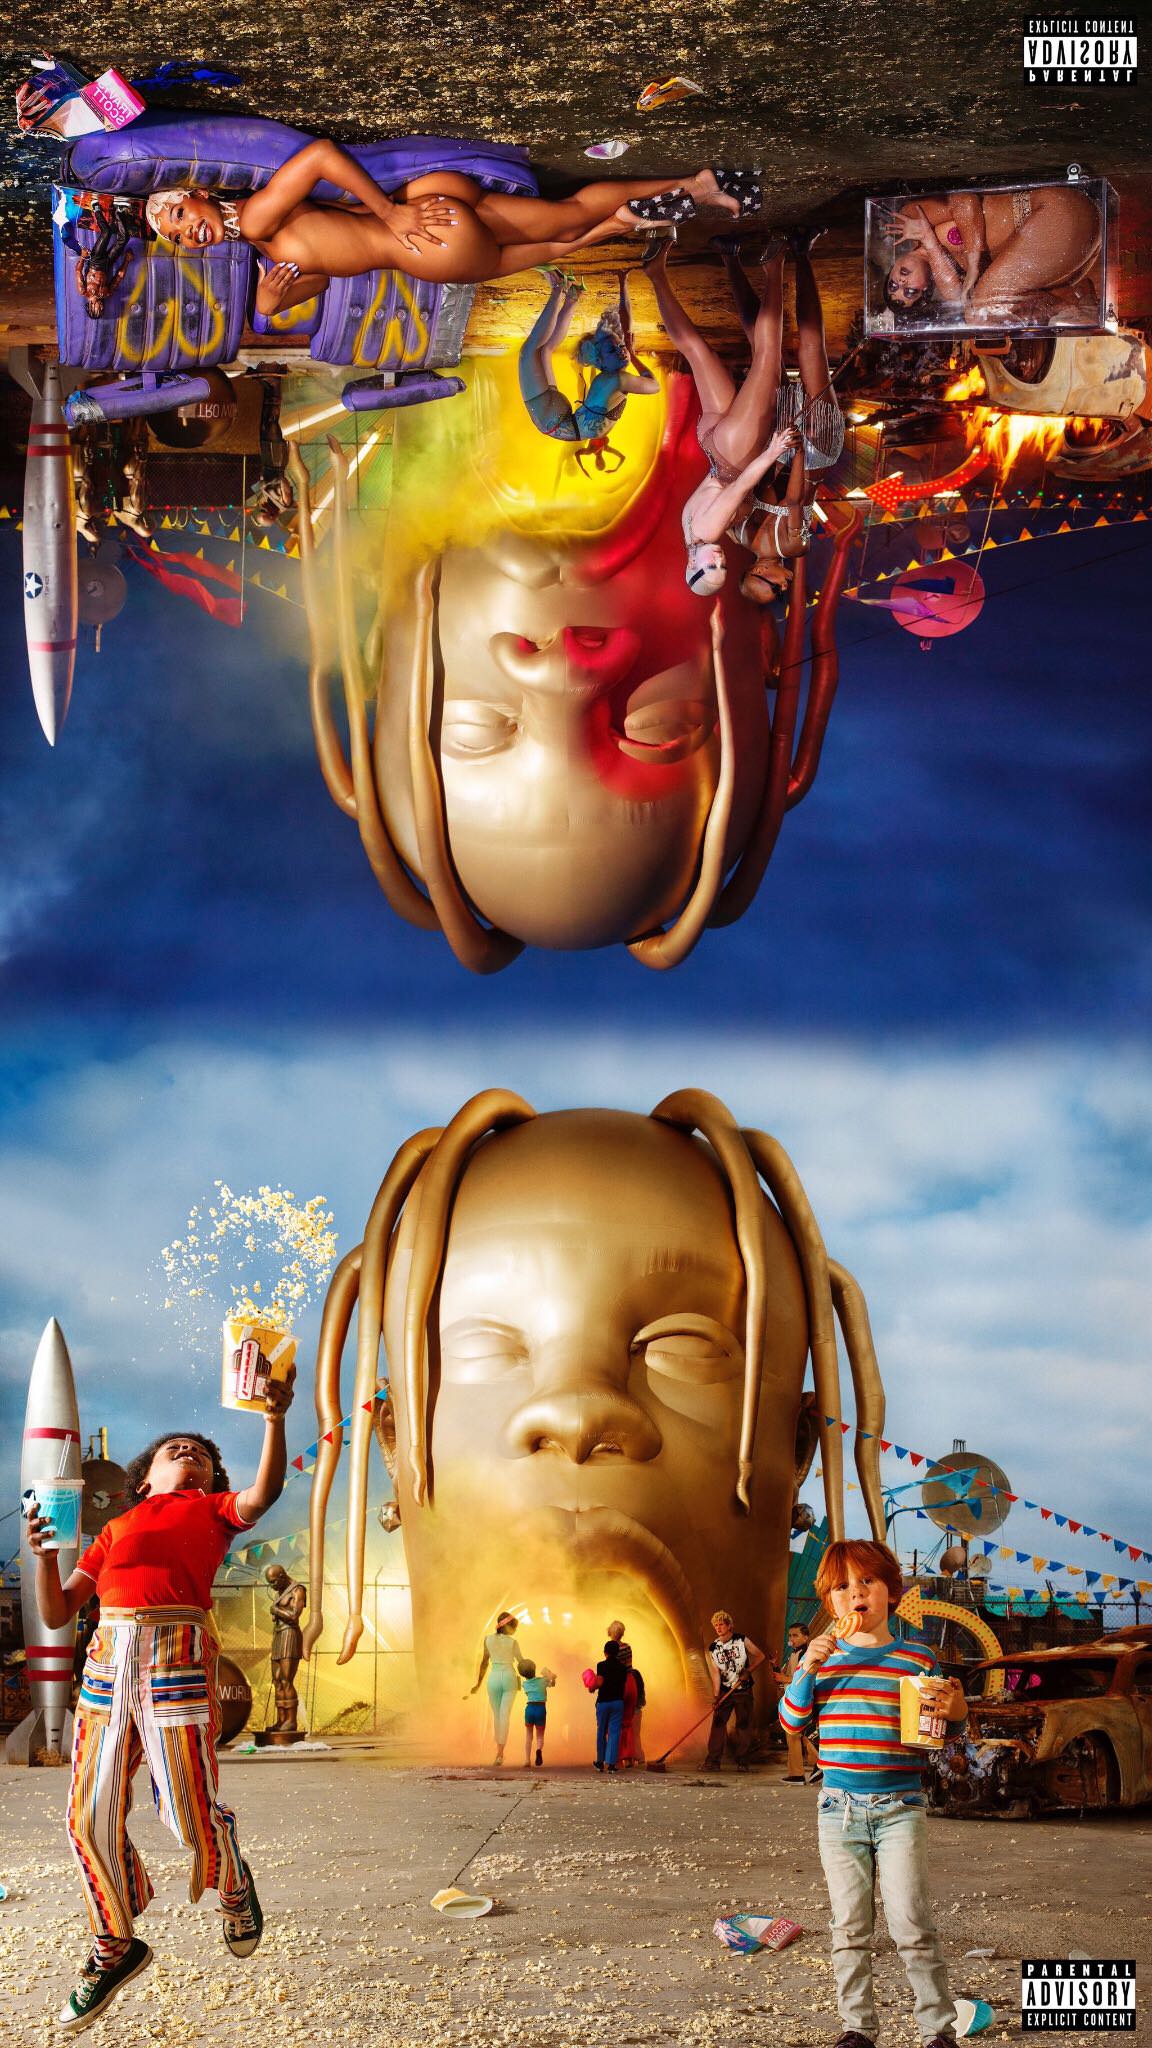 Astroworld Iphone Wallpapers